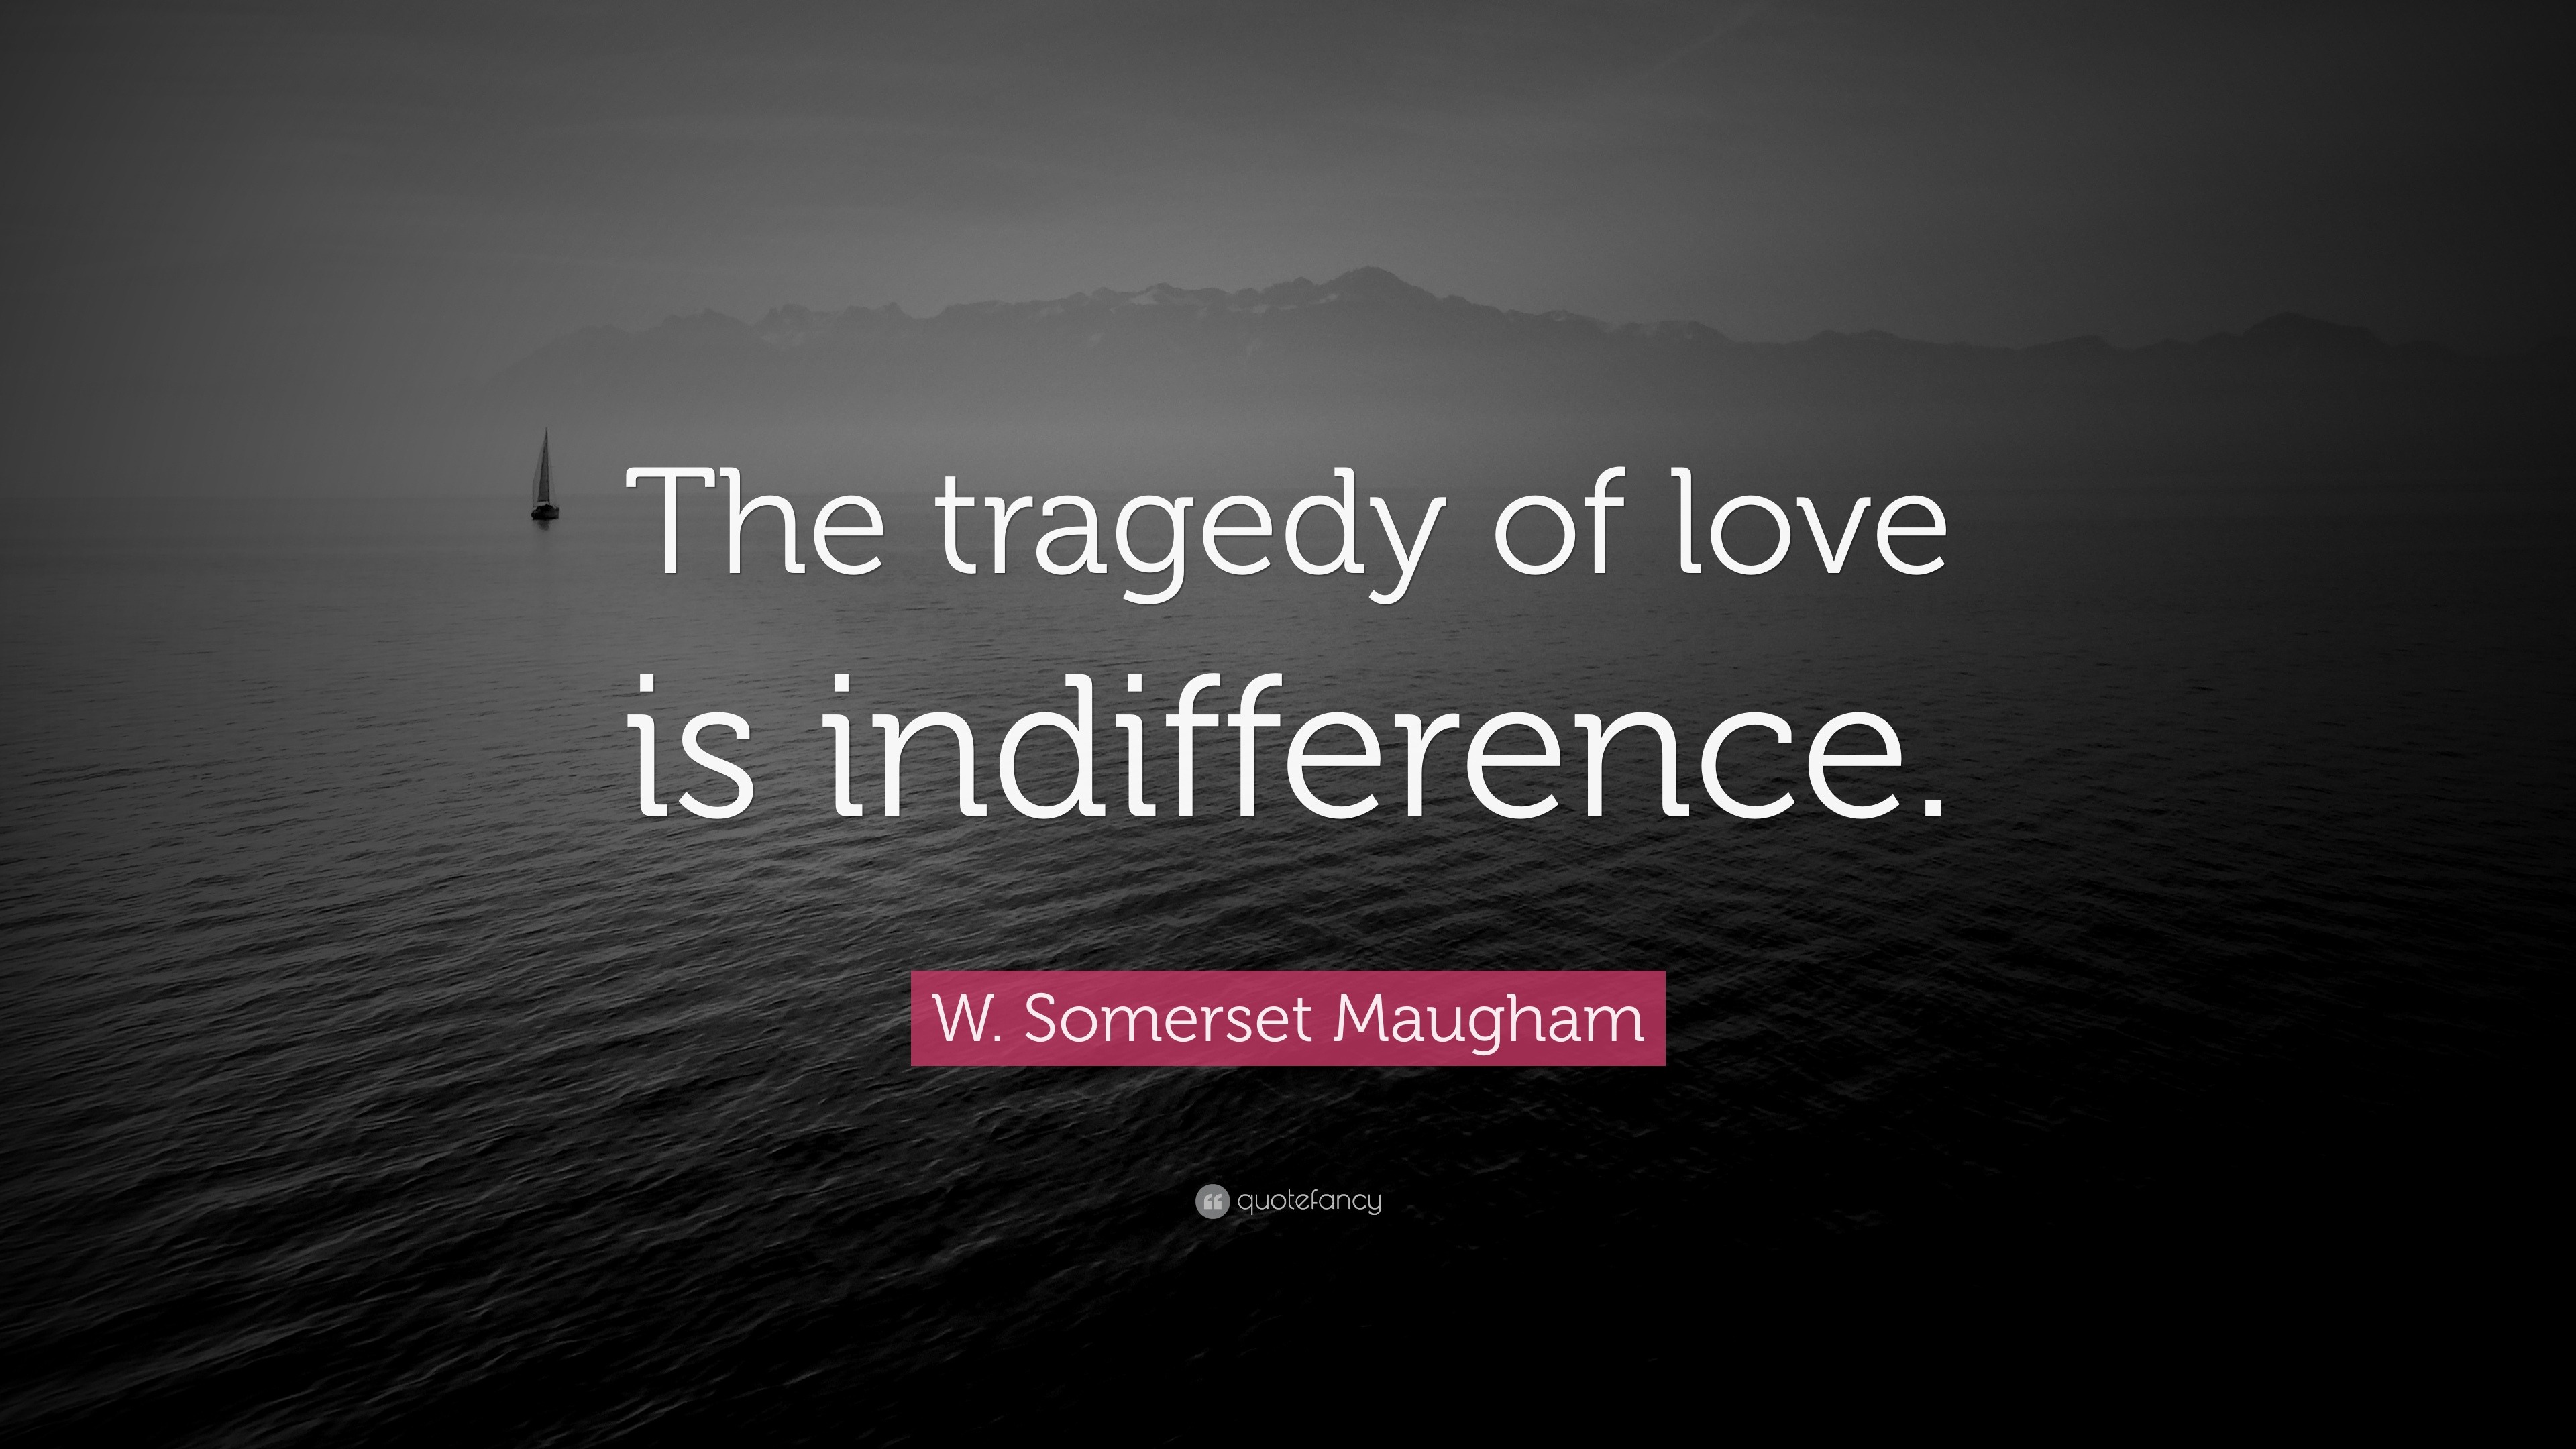 W. Somerset Maugham Quote: “The tragedy of love is indifference.”